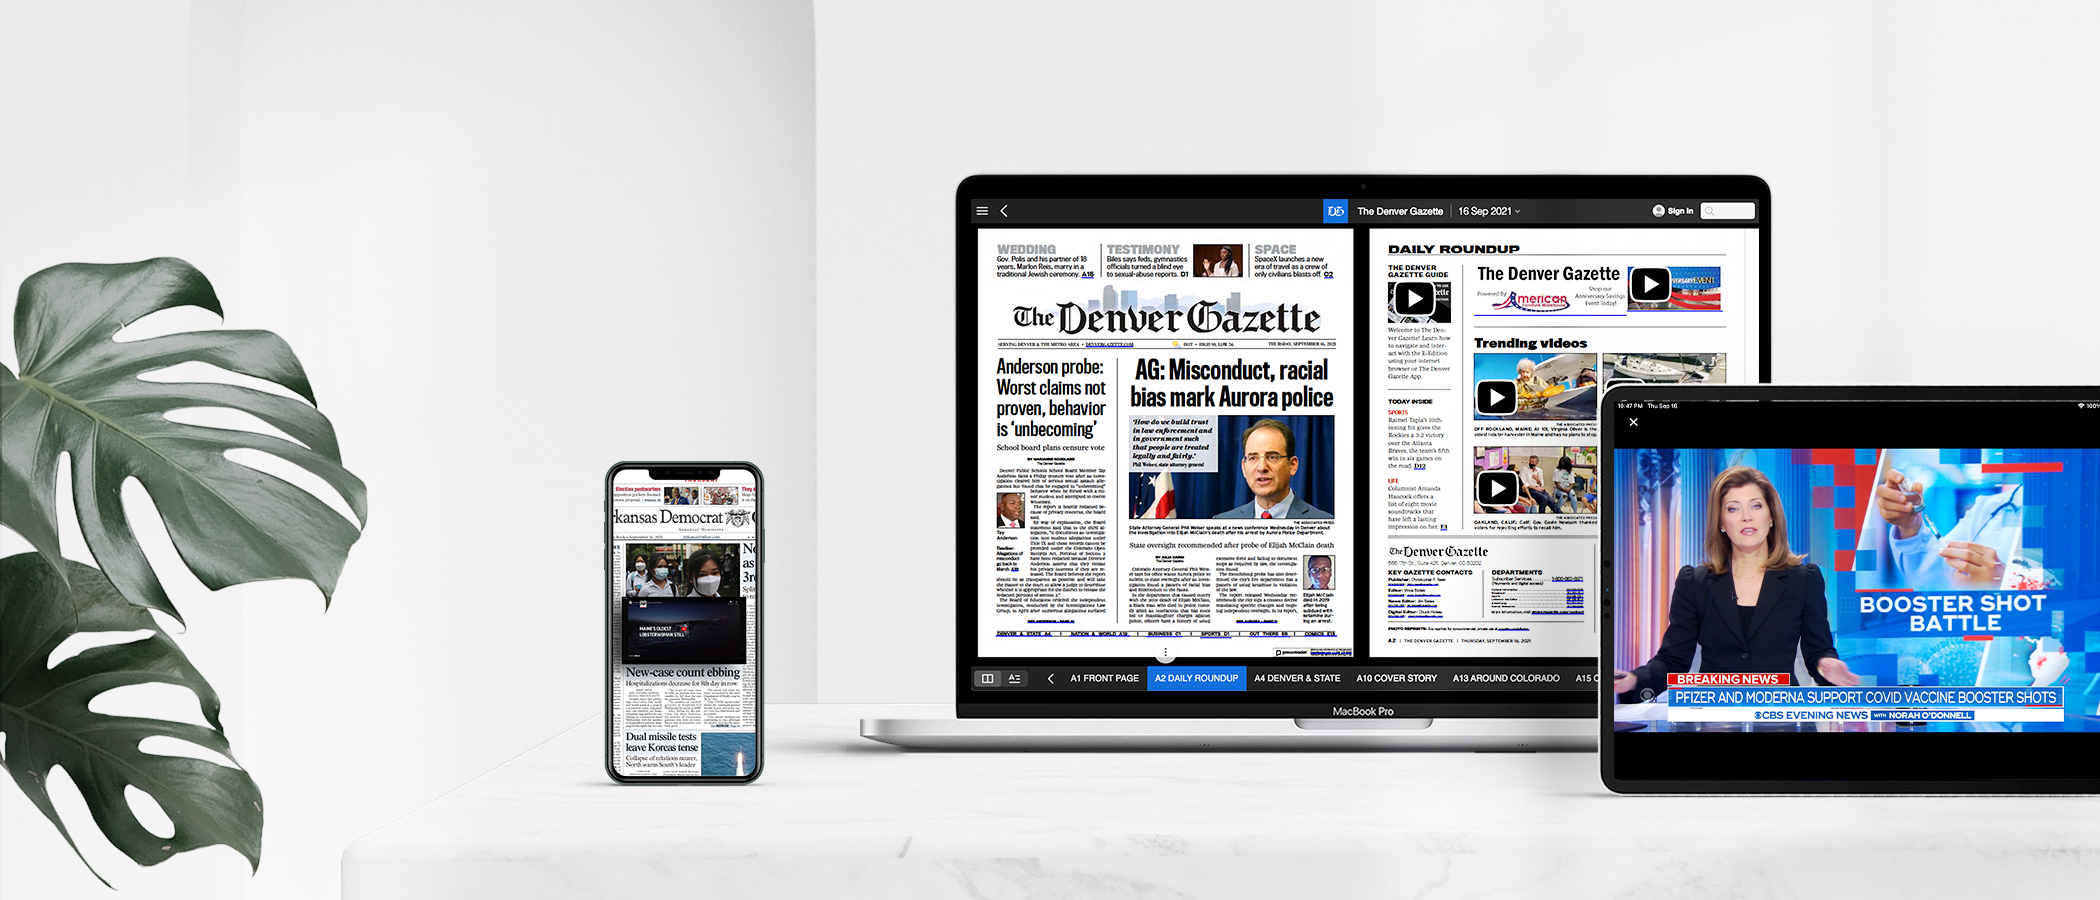 Multimedia integration for e-newspapers